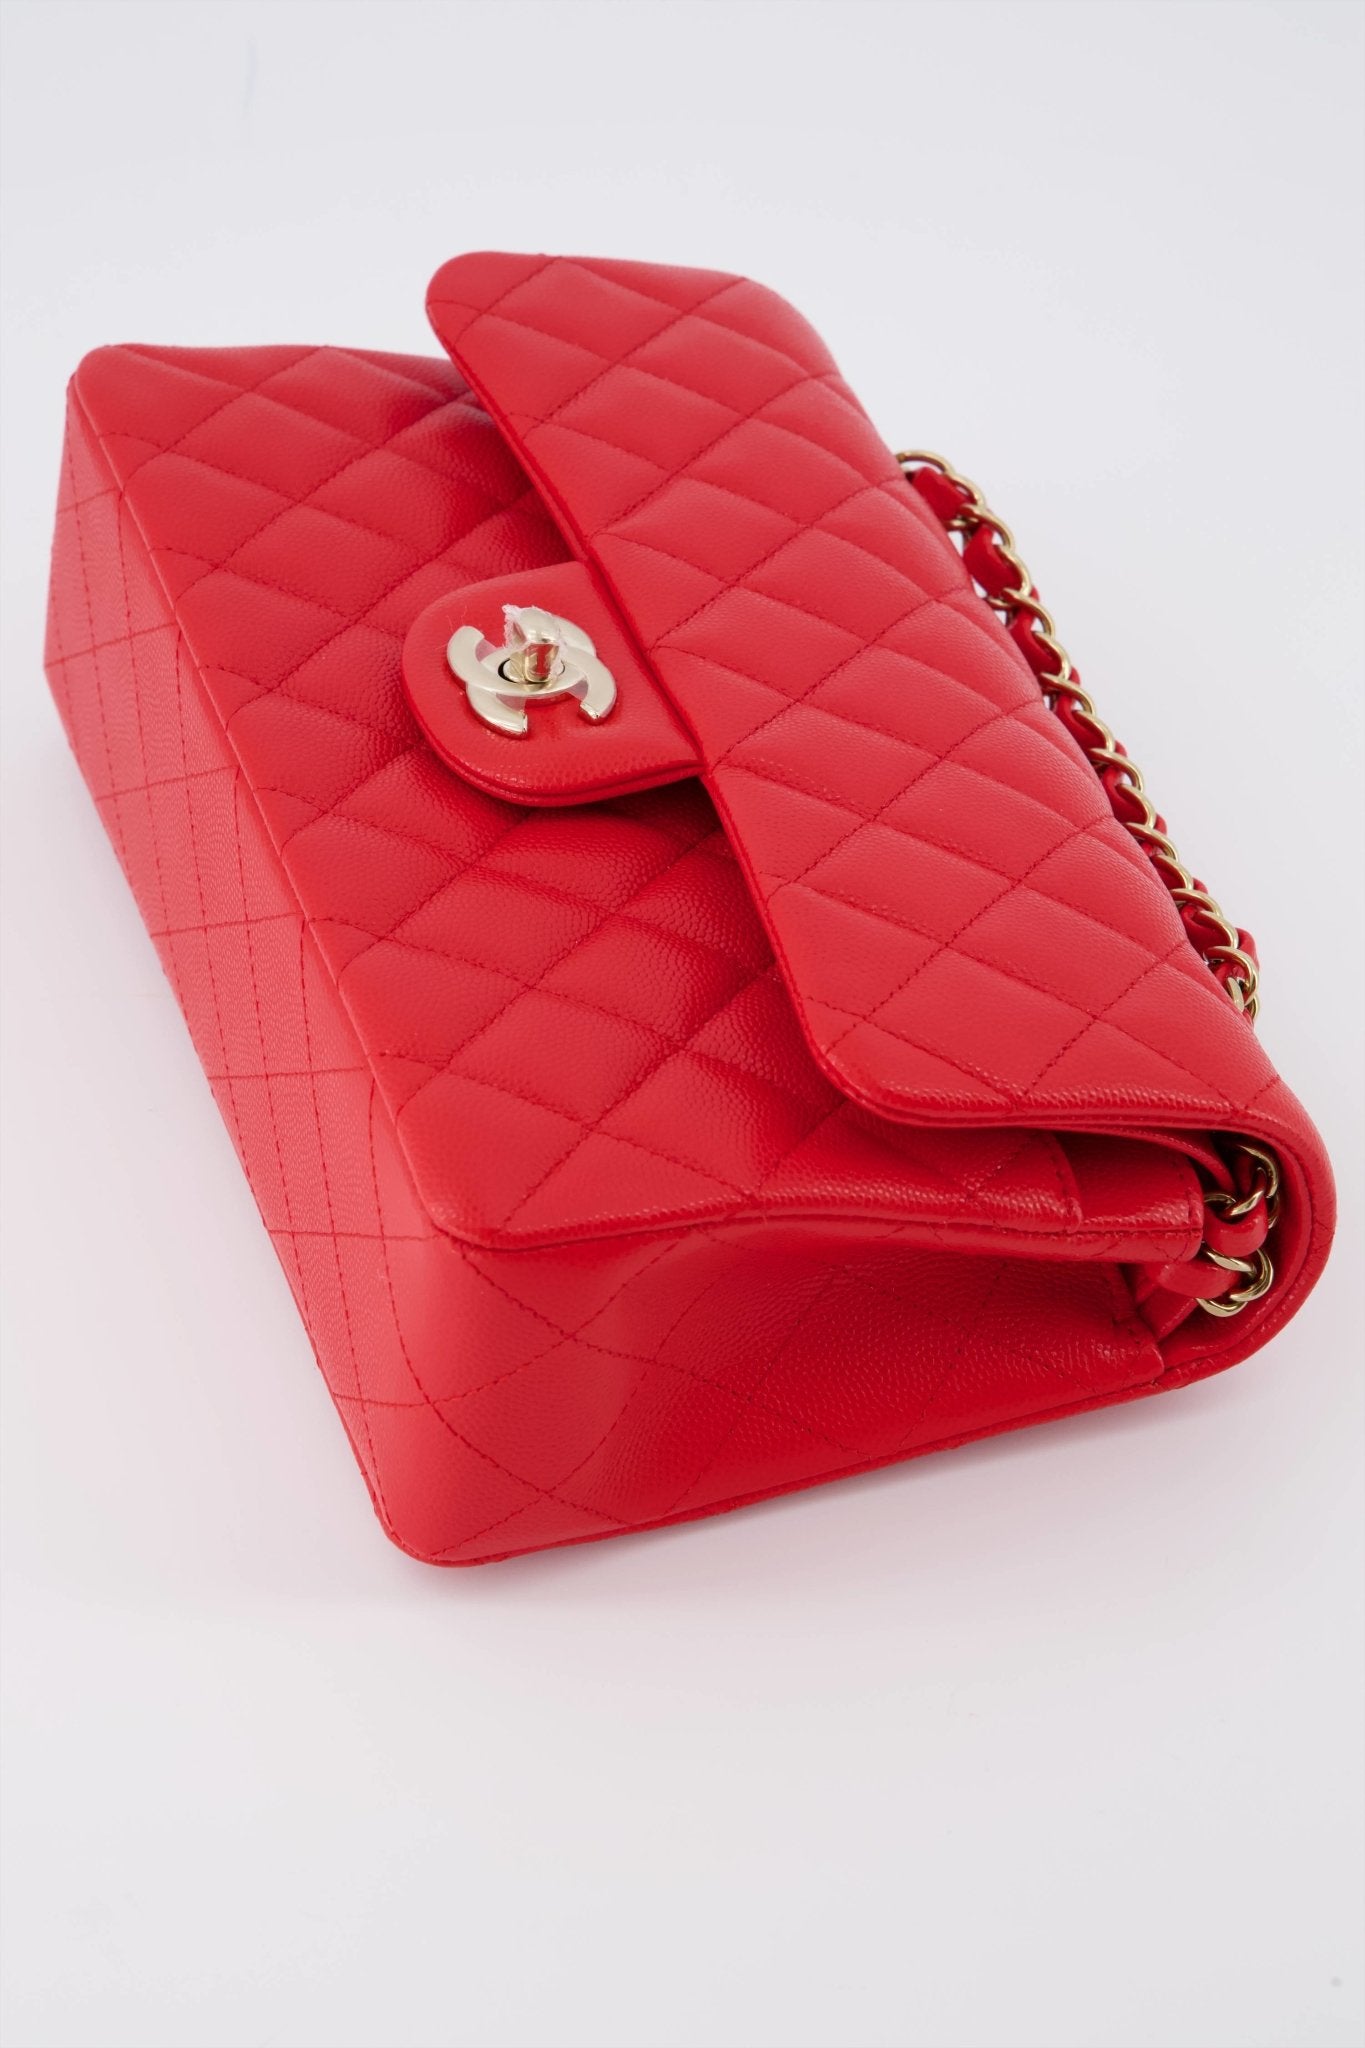 Chanel Red Crocodile Classic Single Flap with Gold Hardware at